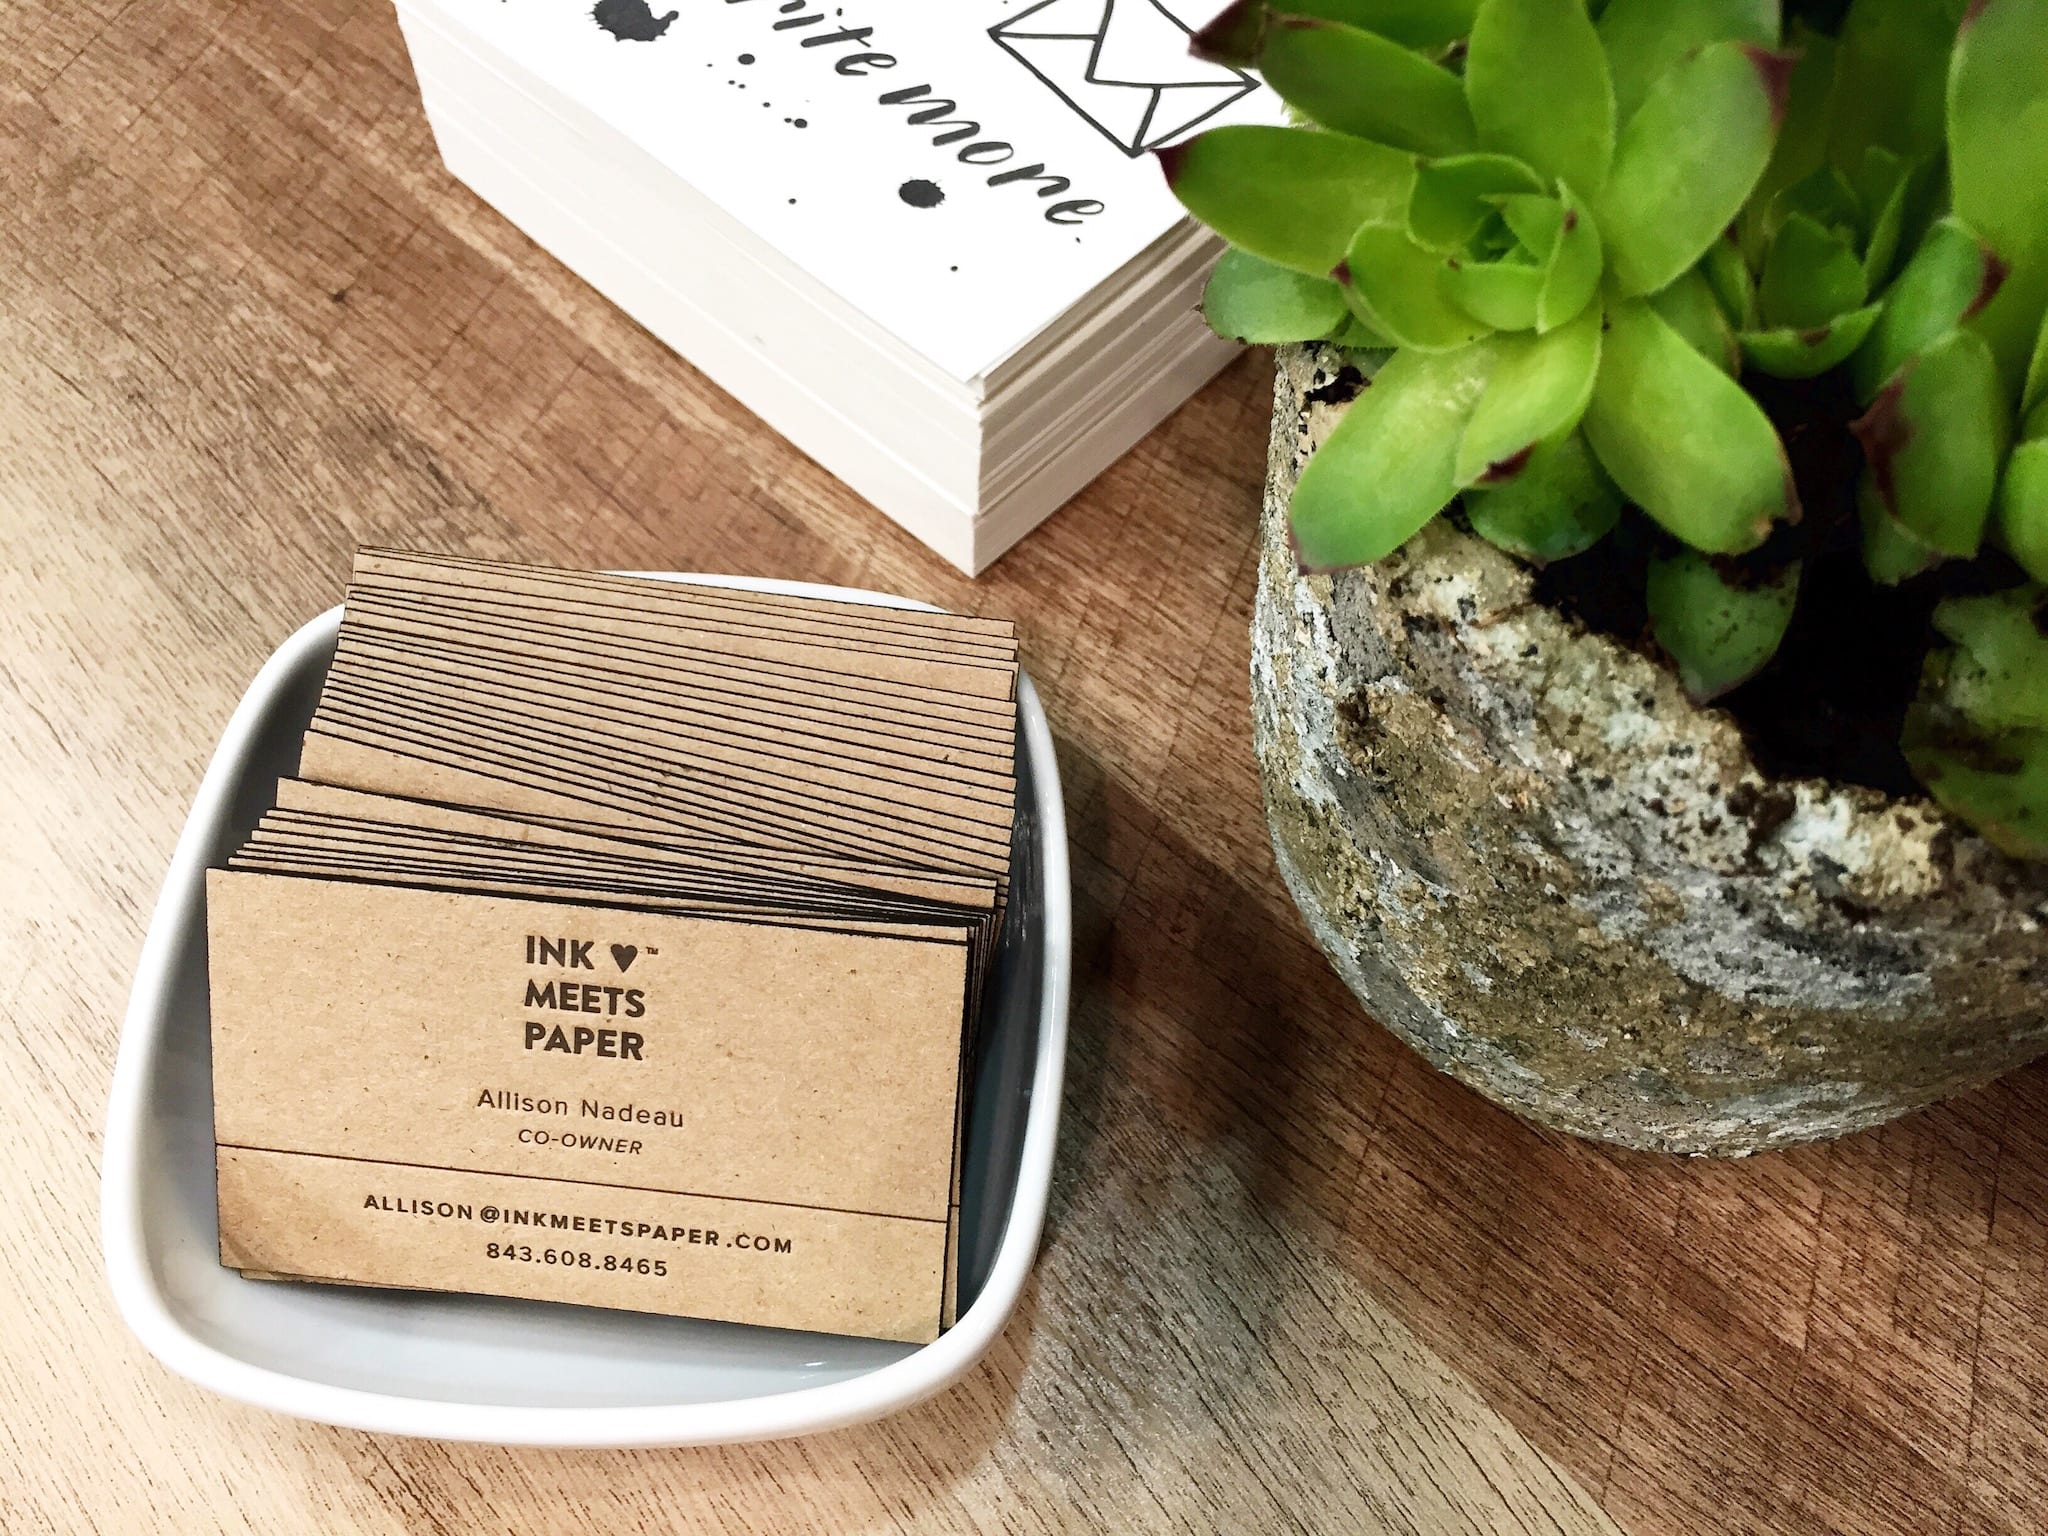 A scene showing INK MEETS PAPER business cards sitting in a tray along with a small succulent plant.